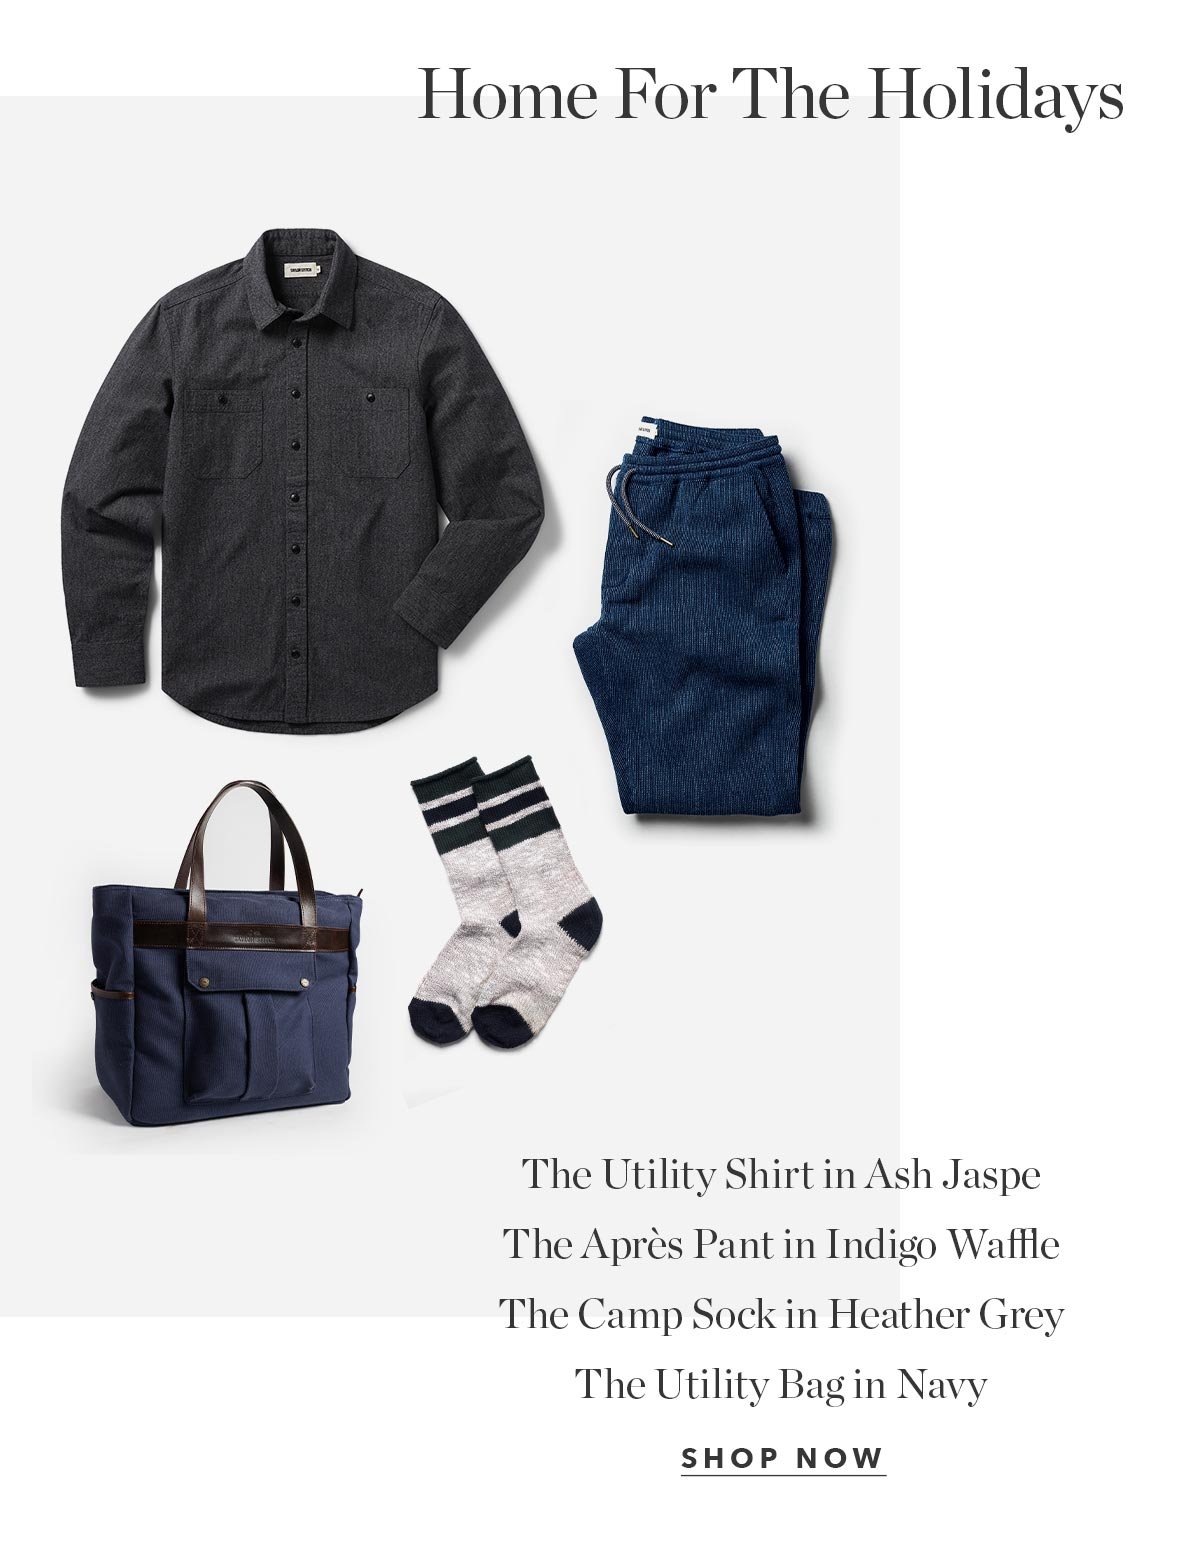 Home For The Holidays: The Utility Shirt in Ash Jaspe, The Après Pant in Indigo Waffle, The Camp Sock in Heather Grey, The Utility Bag in Navy